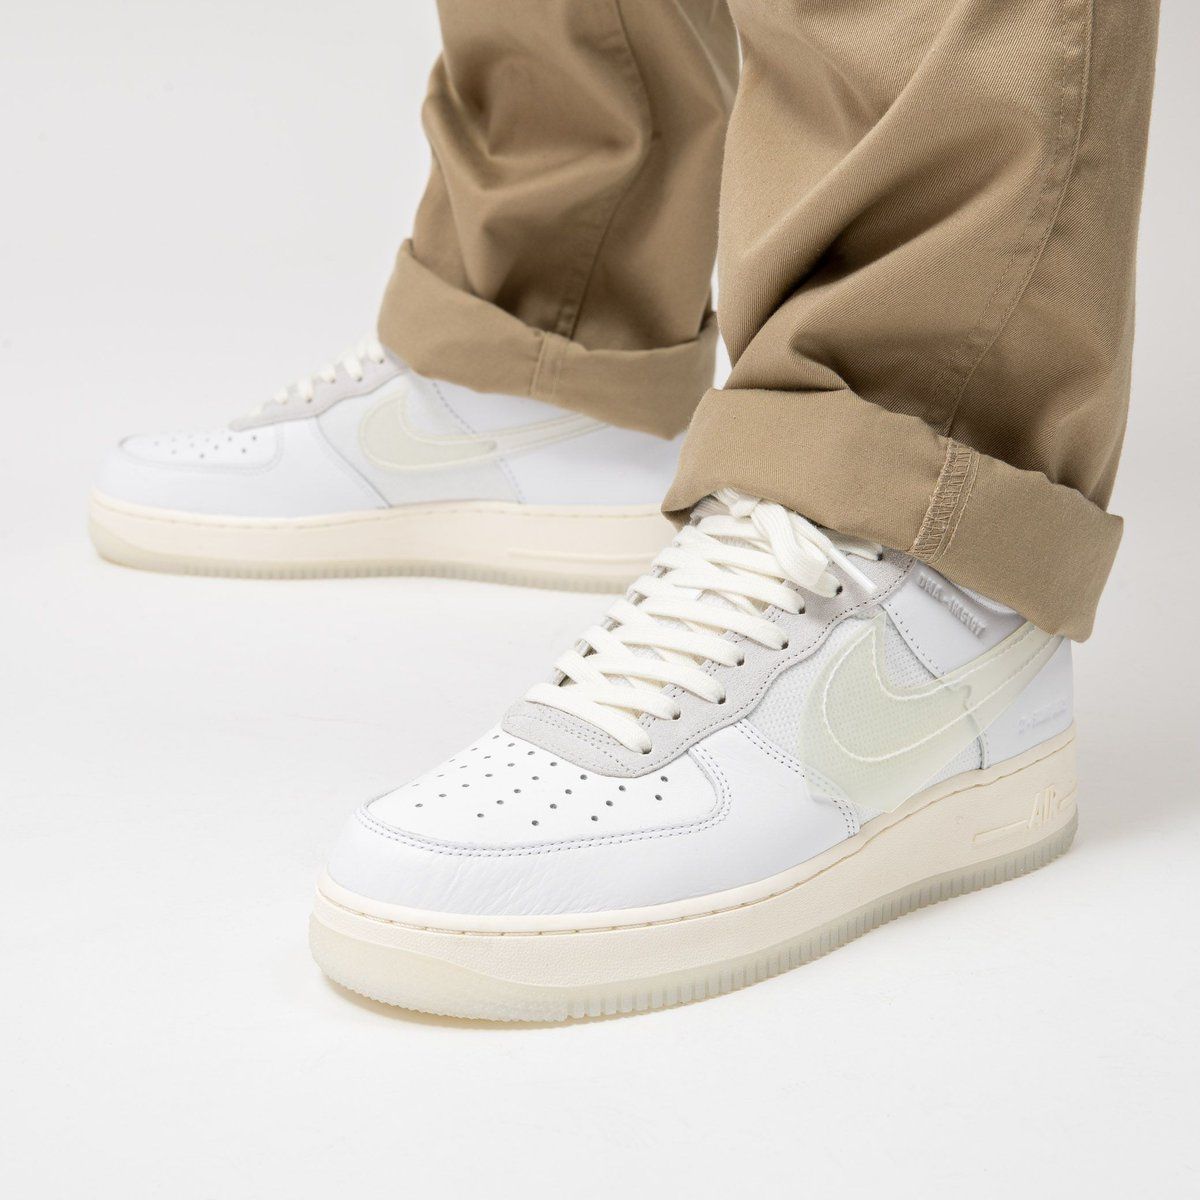 Myth on Twitter: "ad: Nike Air Force 1 DNA 'White' Available Most Sizes At &gt;&gt; https://t.co/p8Fl3KDTJC https://t.co/3lO5uOdCQC" /